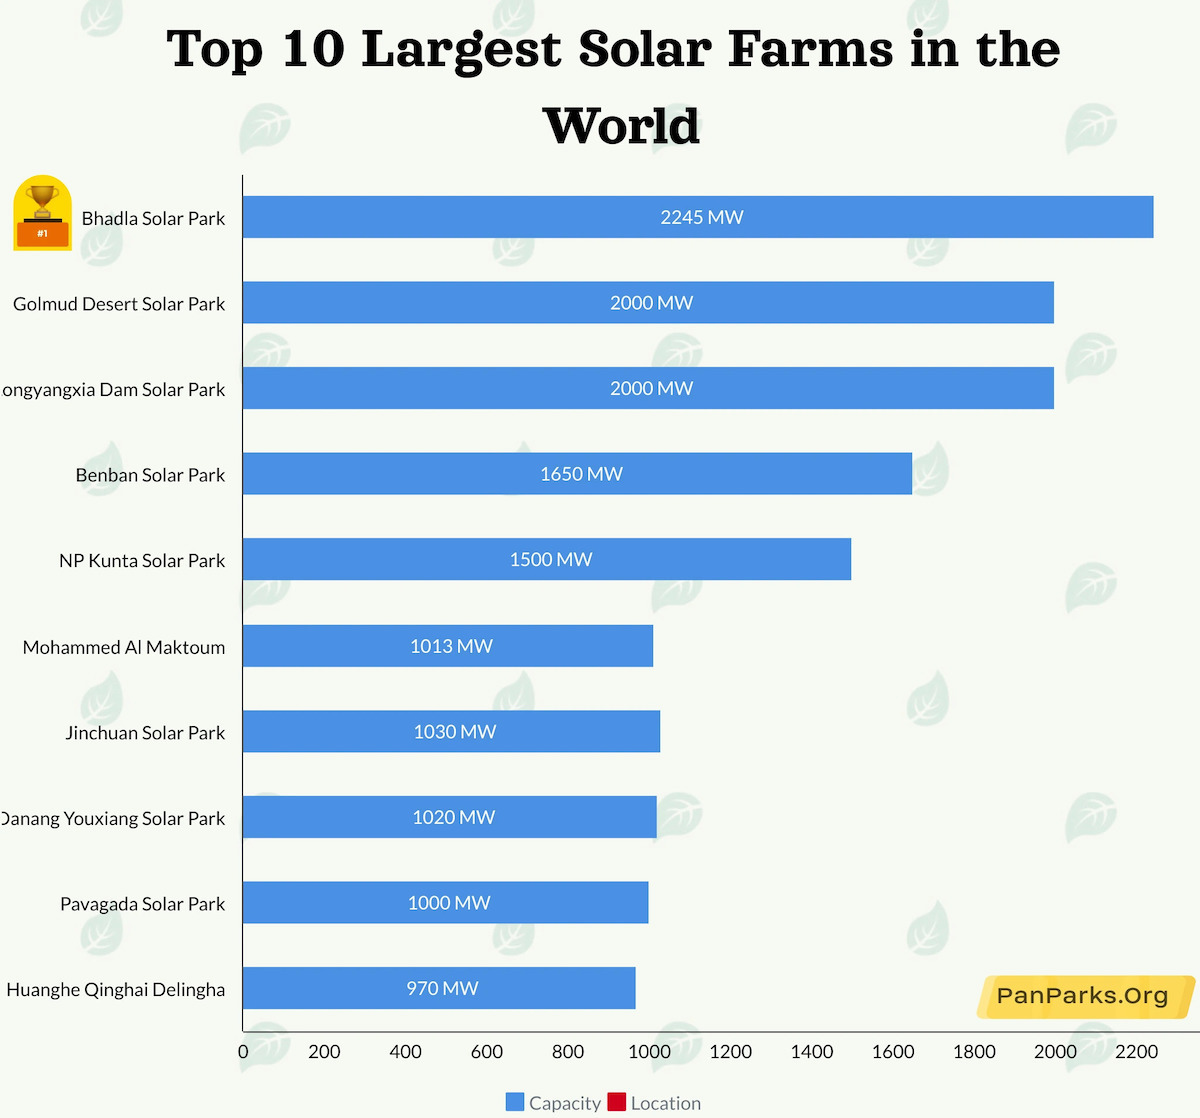 Top 10 Largest Solar Farms in the World